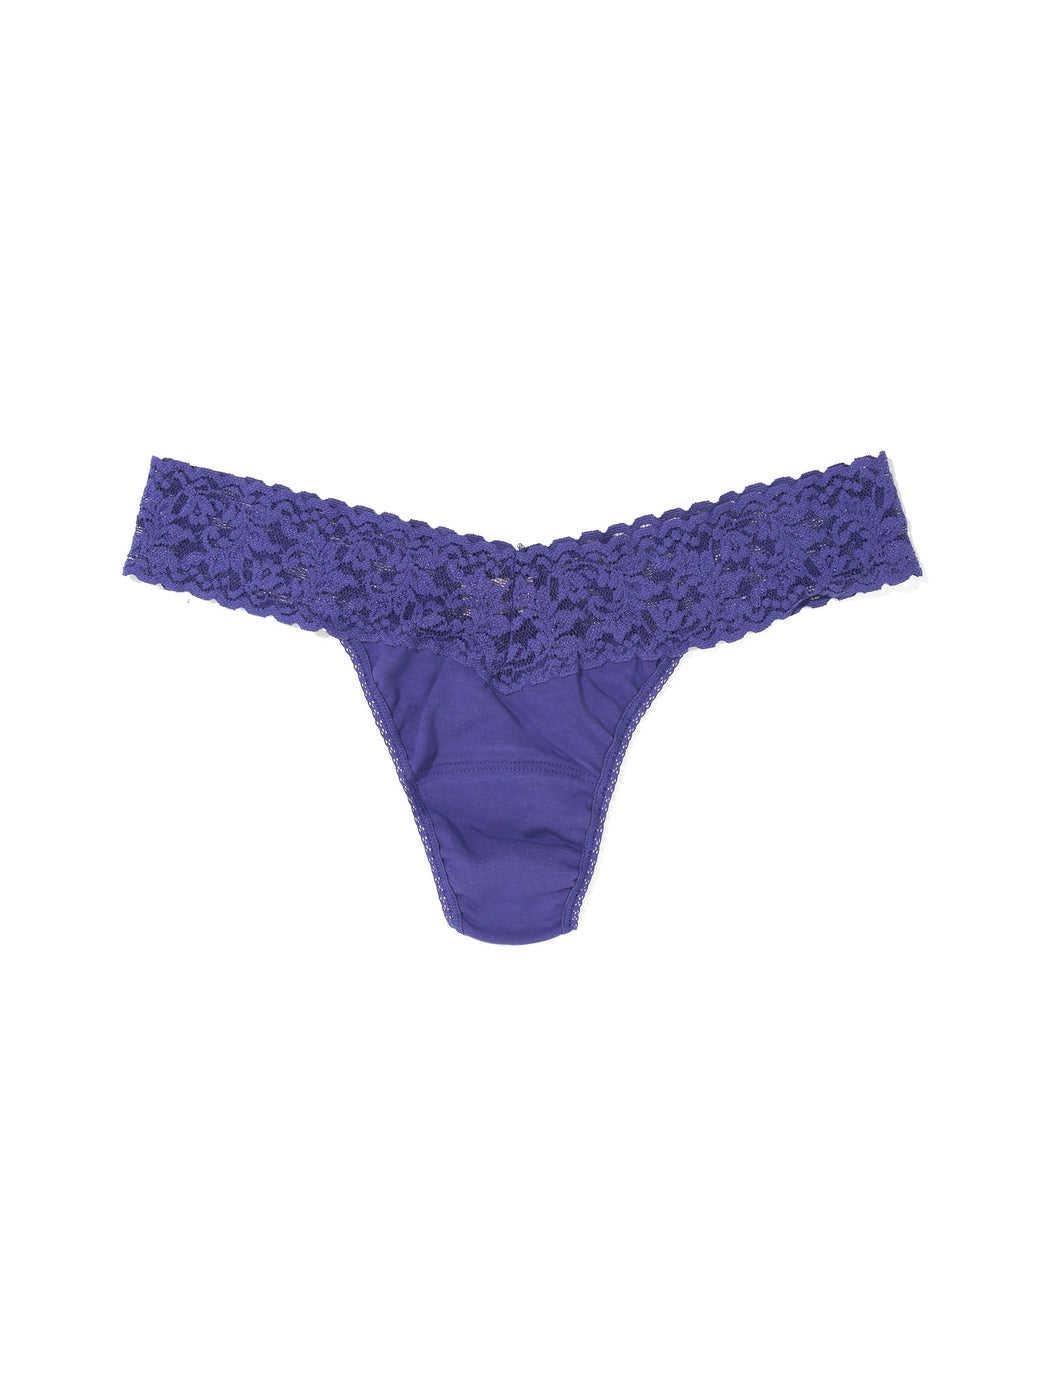 This Soma Intimates Thong Doesn't Snag or Leave You Swampy